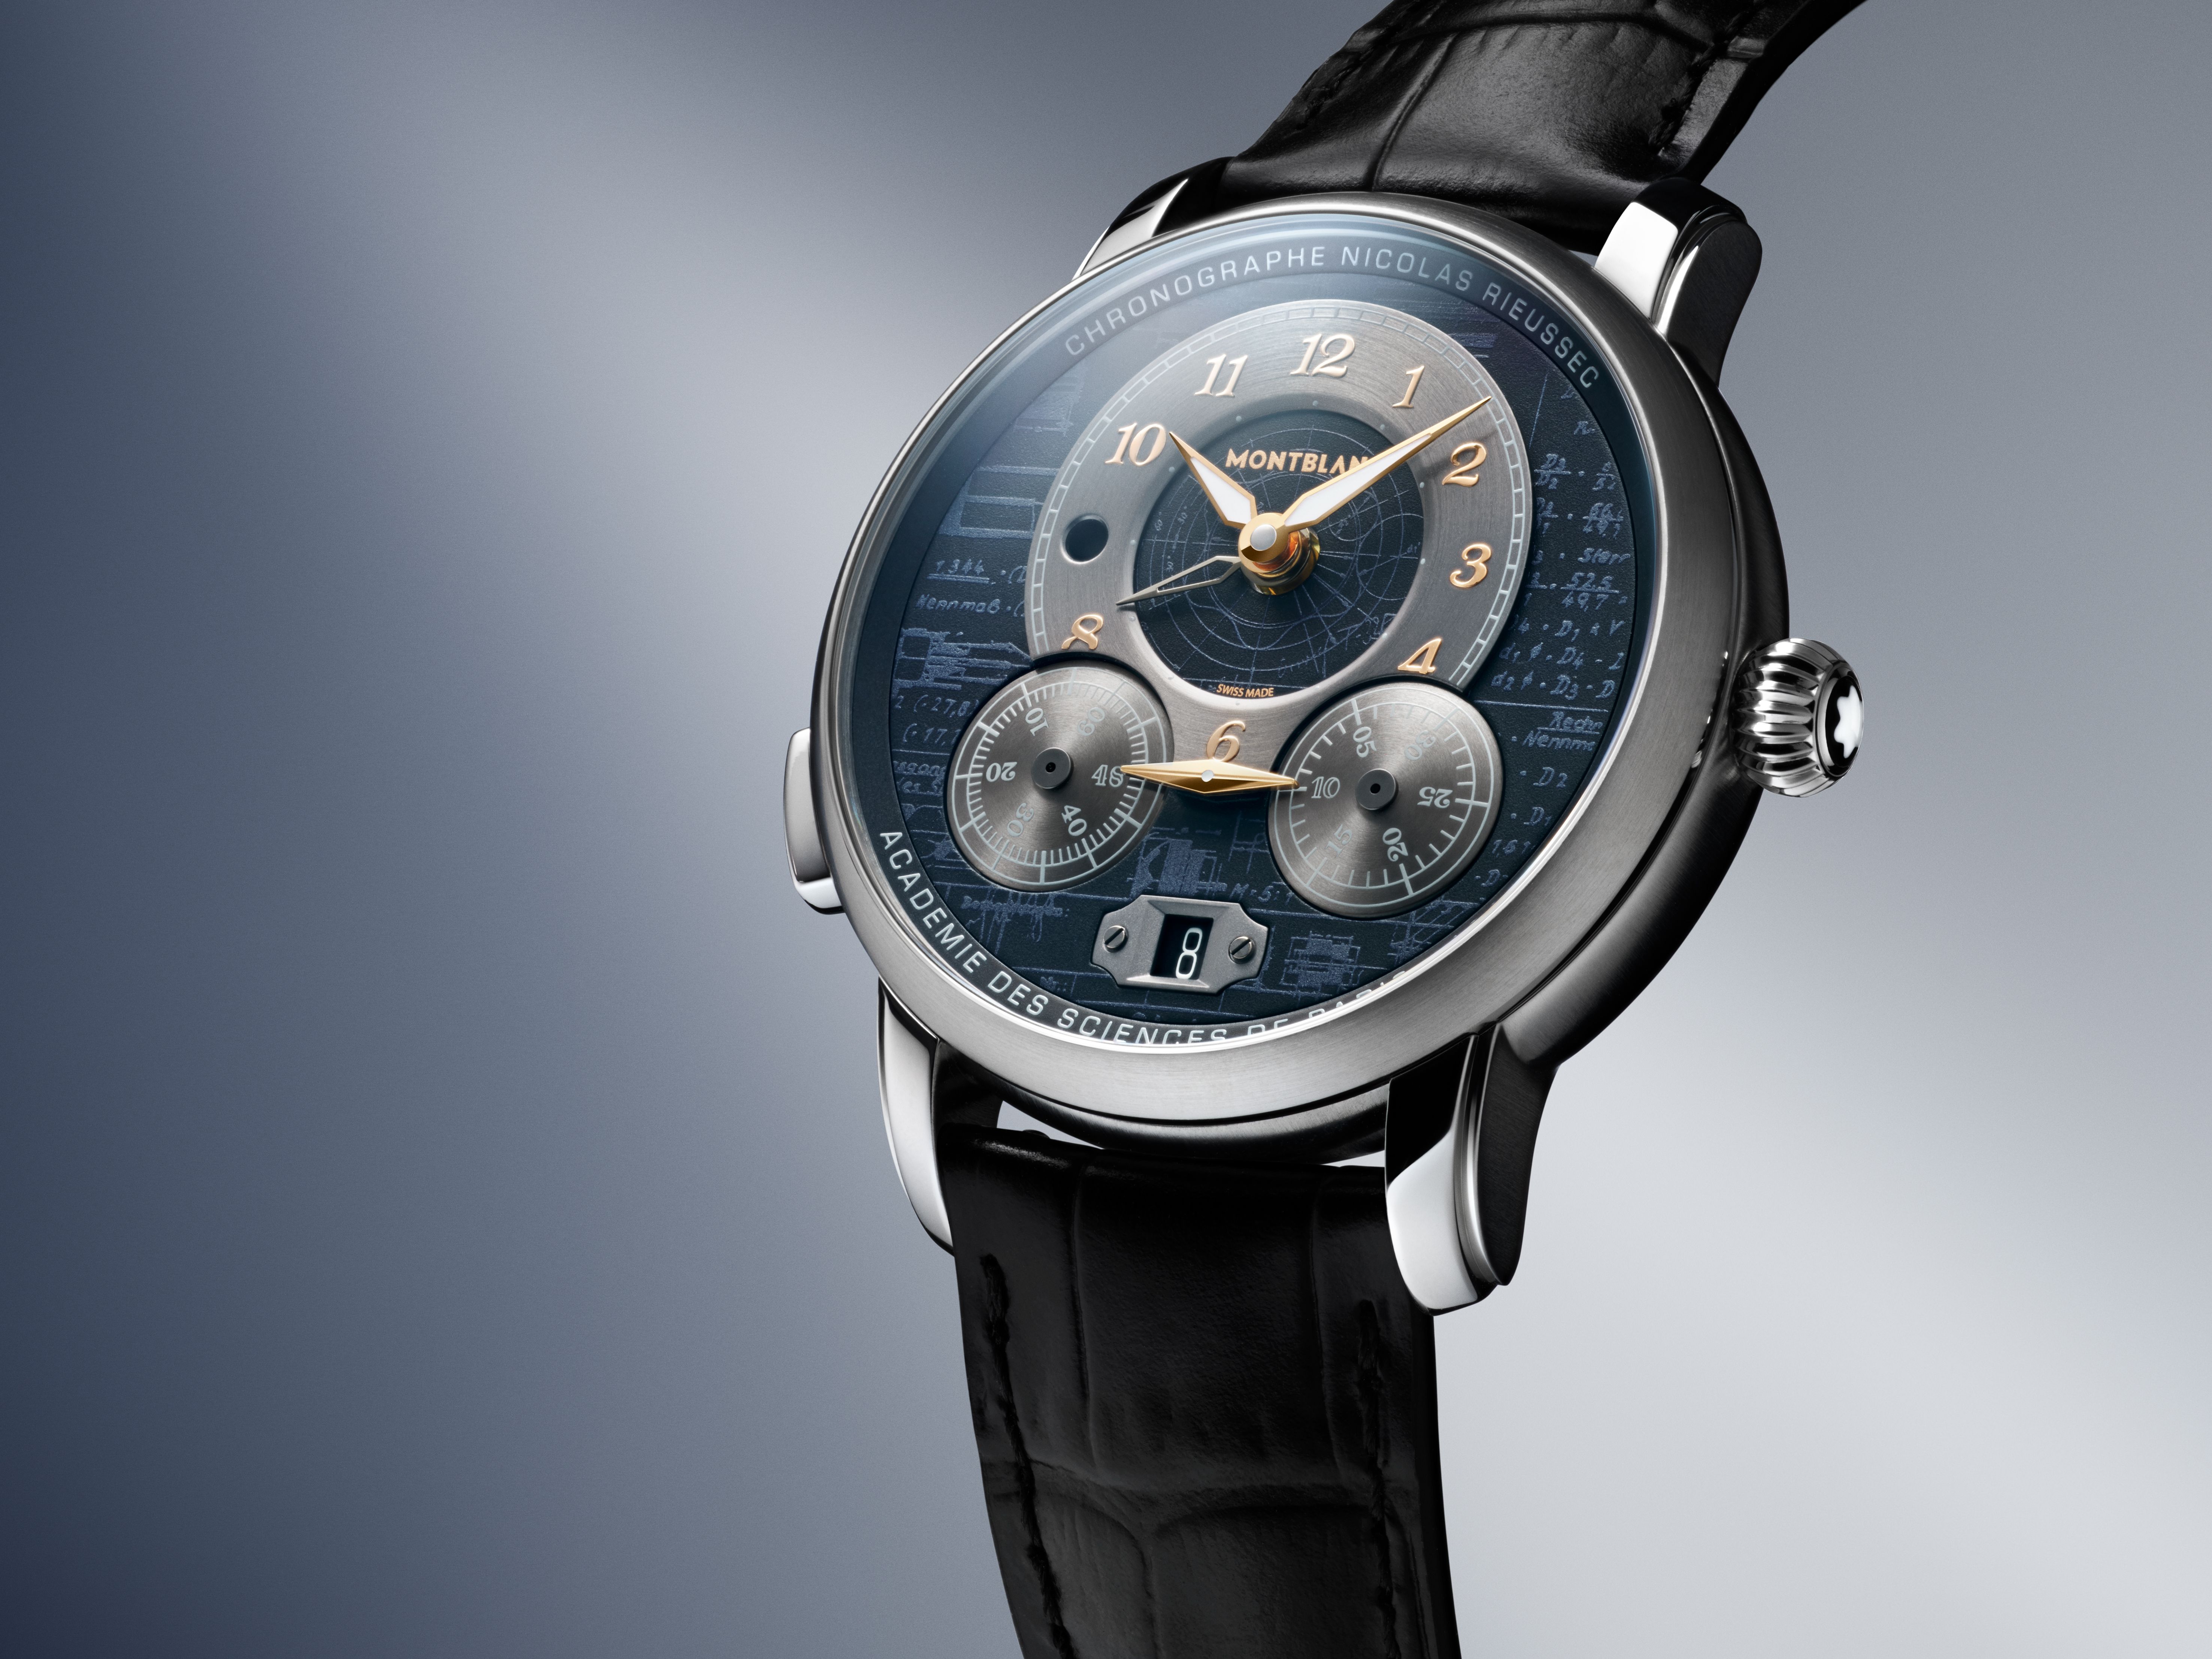 The Montblanc Celebrates 100 Years of Meisterstück Chronograph is limited to 500 pieces